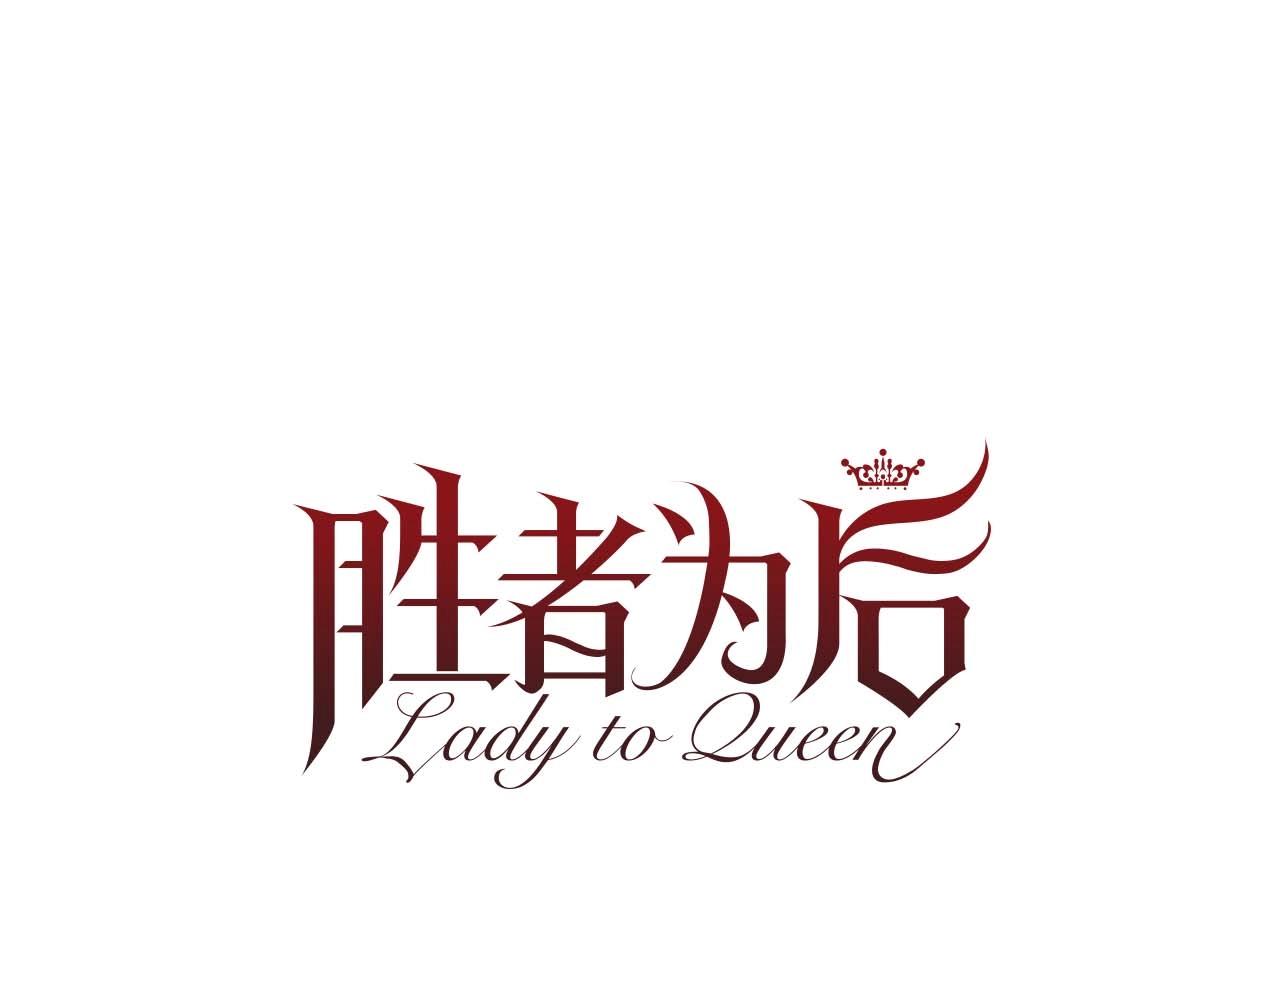 Lady to Queen-勝者爲後 - 第40話 無罪釋放(1/3) - 1